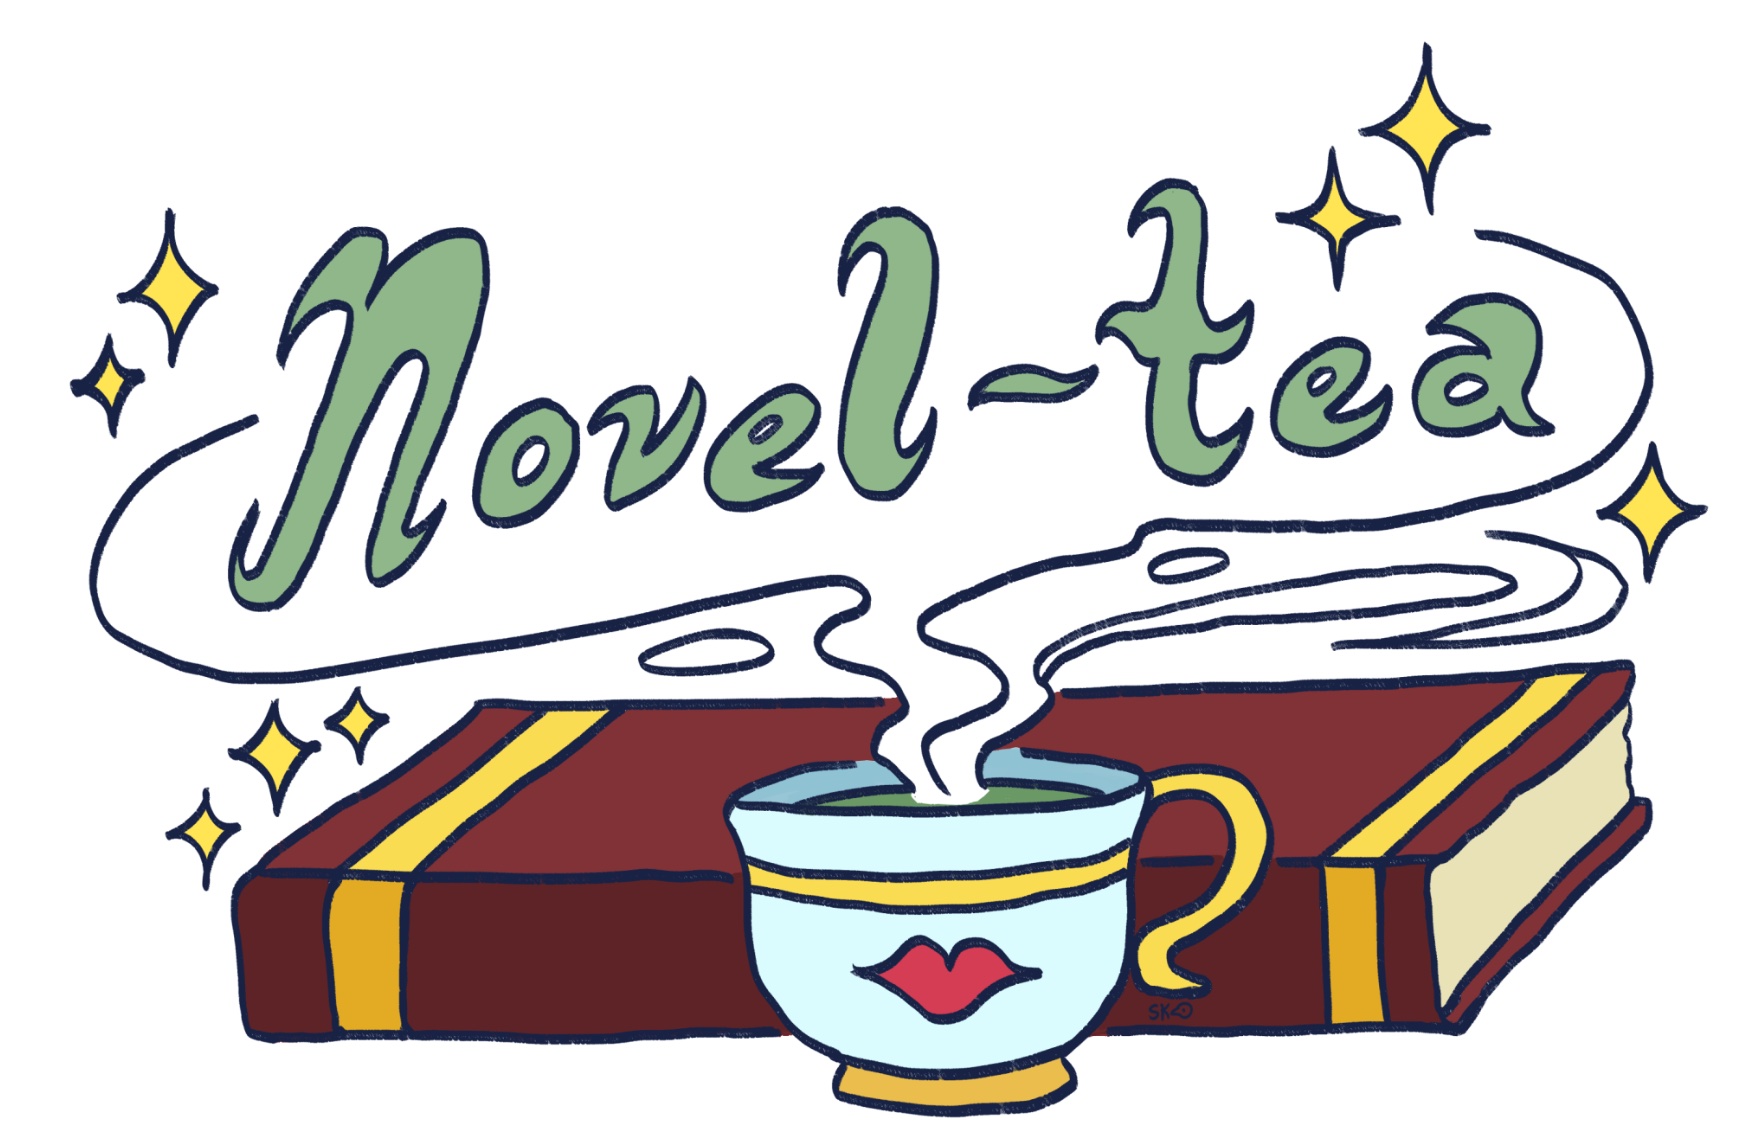 Novel-tea: The best and worst literary tropes